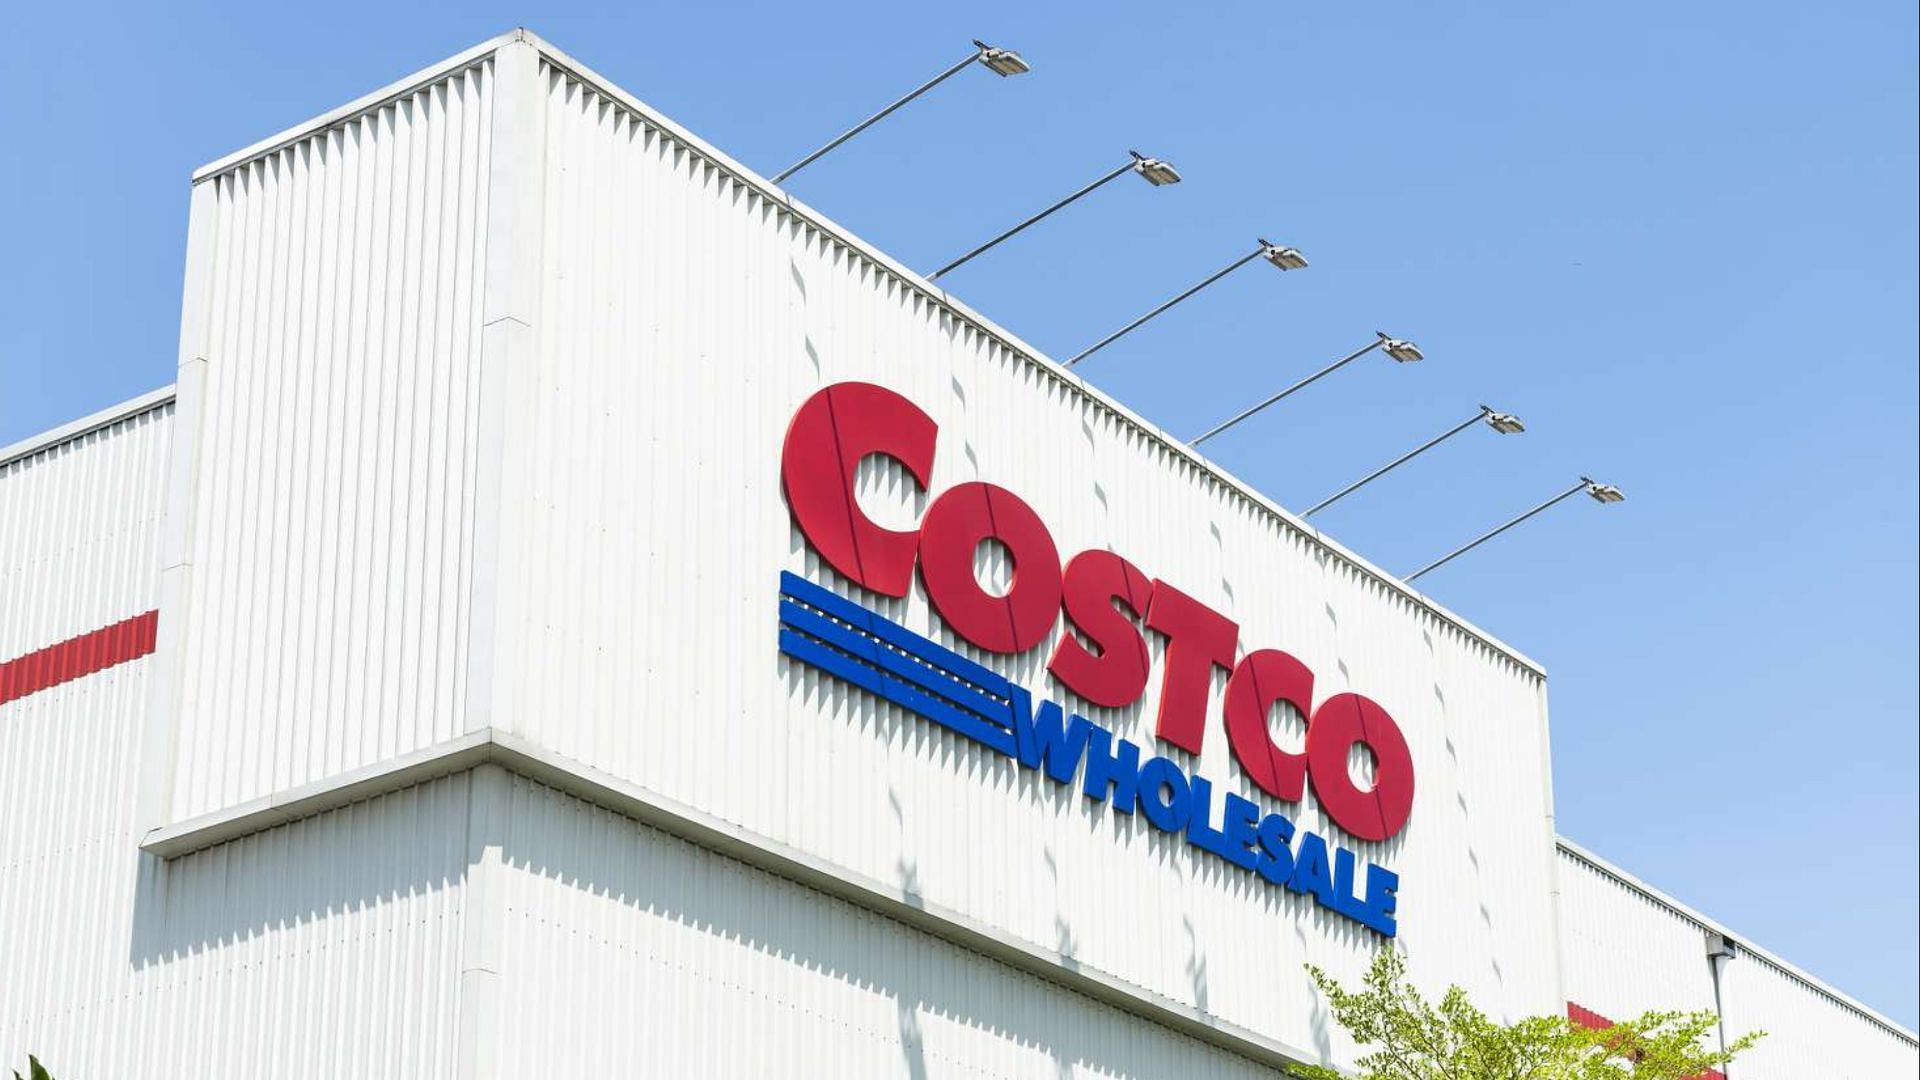 new automated food-sample distribution Kiosk-based systems spotted at select Costco stores across the country (Image via Bing-Jhen Hong/Getty Images)